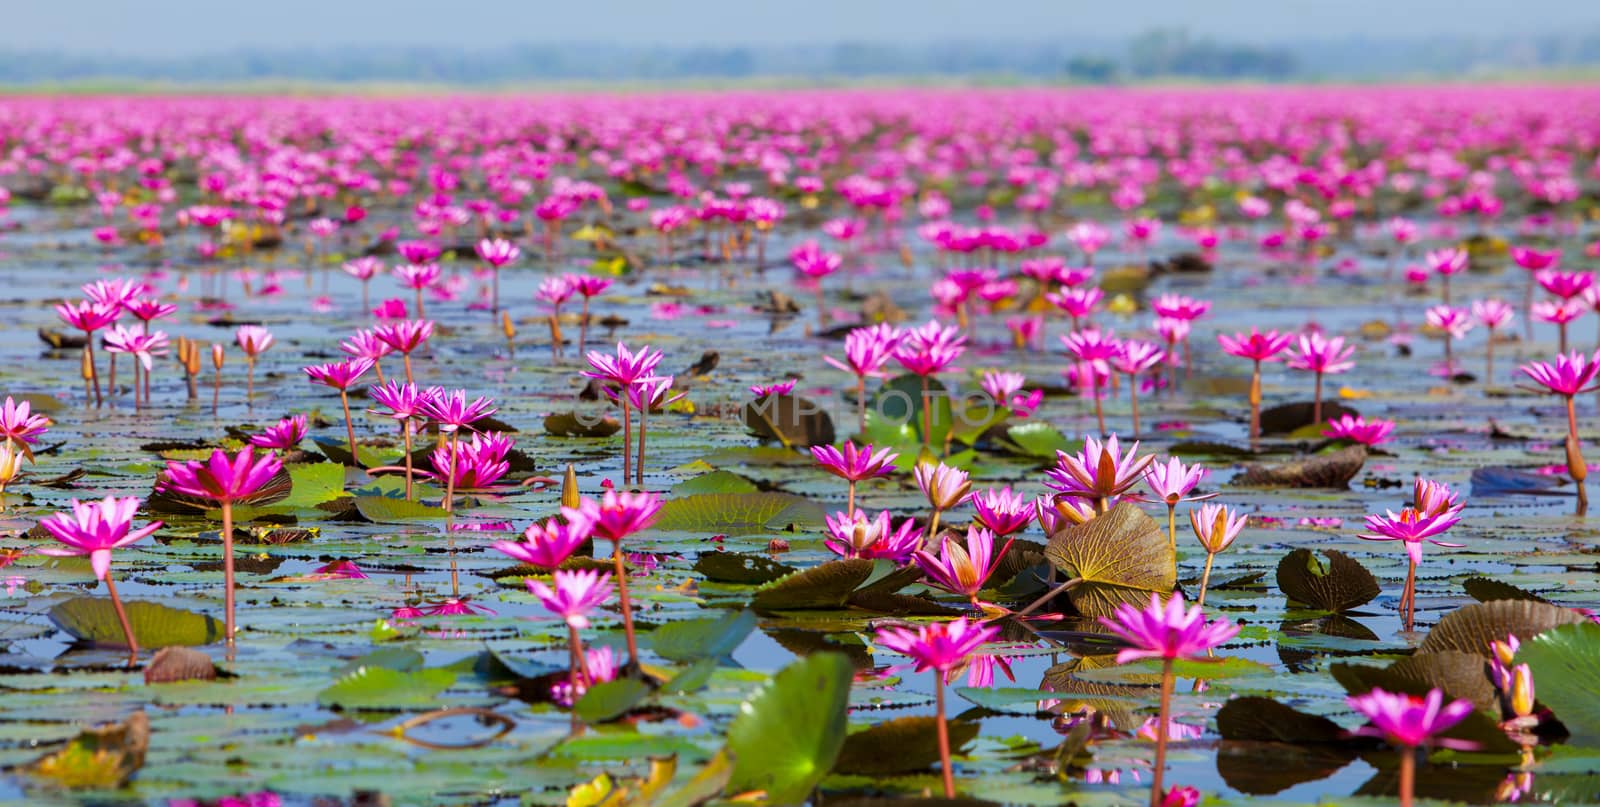 Ban Bua Daeng, Udon Thani , picture of beautiful lotus flower field at the red lotus Panorama View.